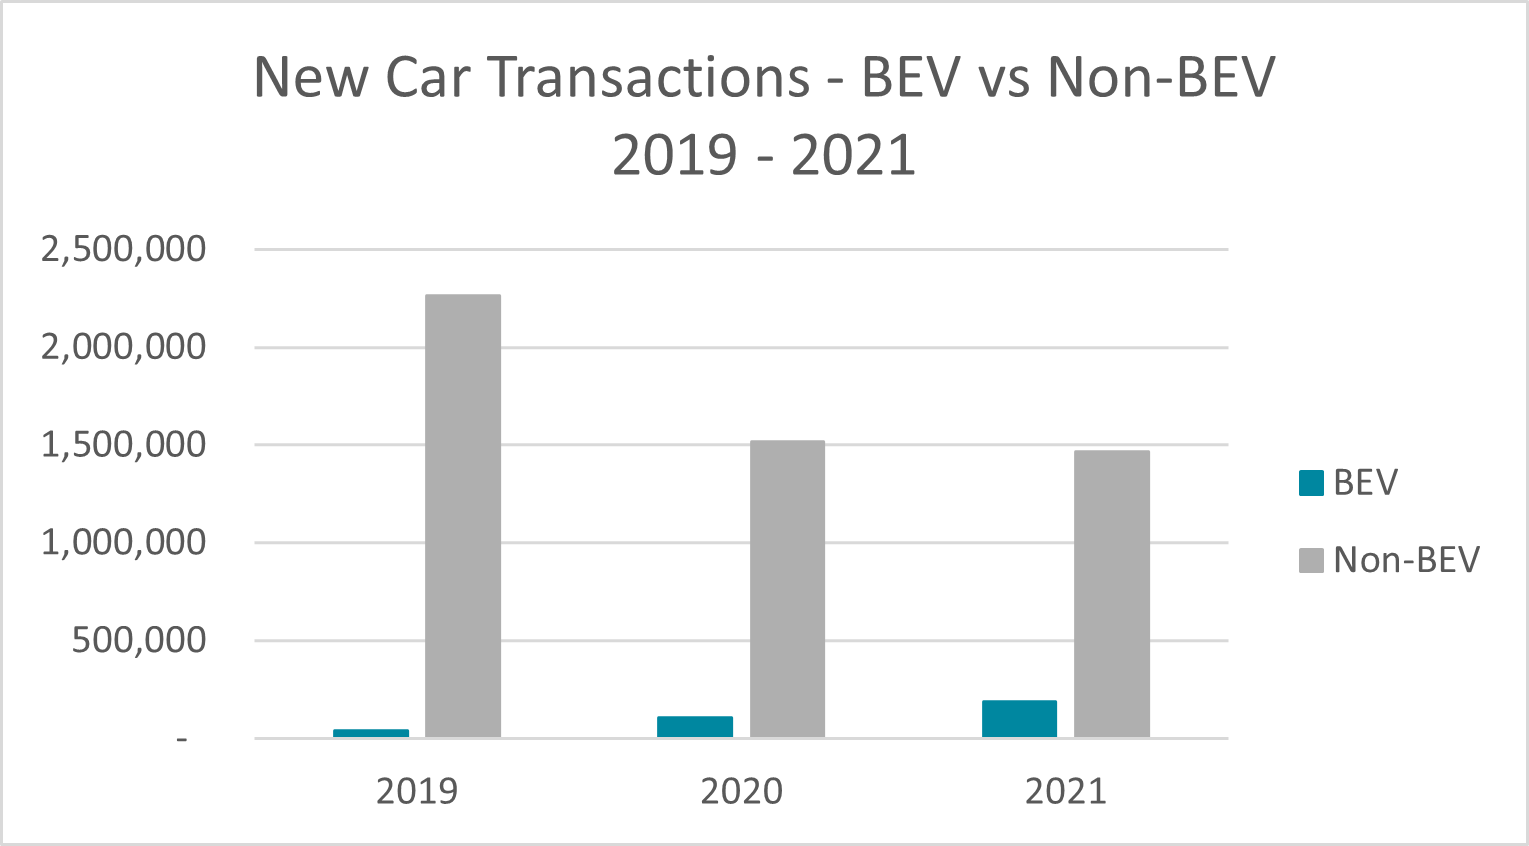 Comparing the Battery Electrical Vehicle Registrations of New Cars compared to traditional fuel vehicles between 2019 and 2021